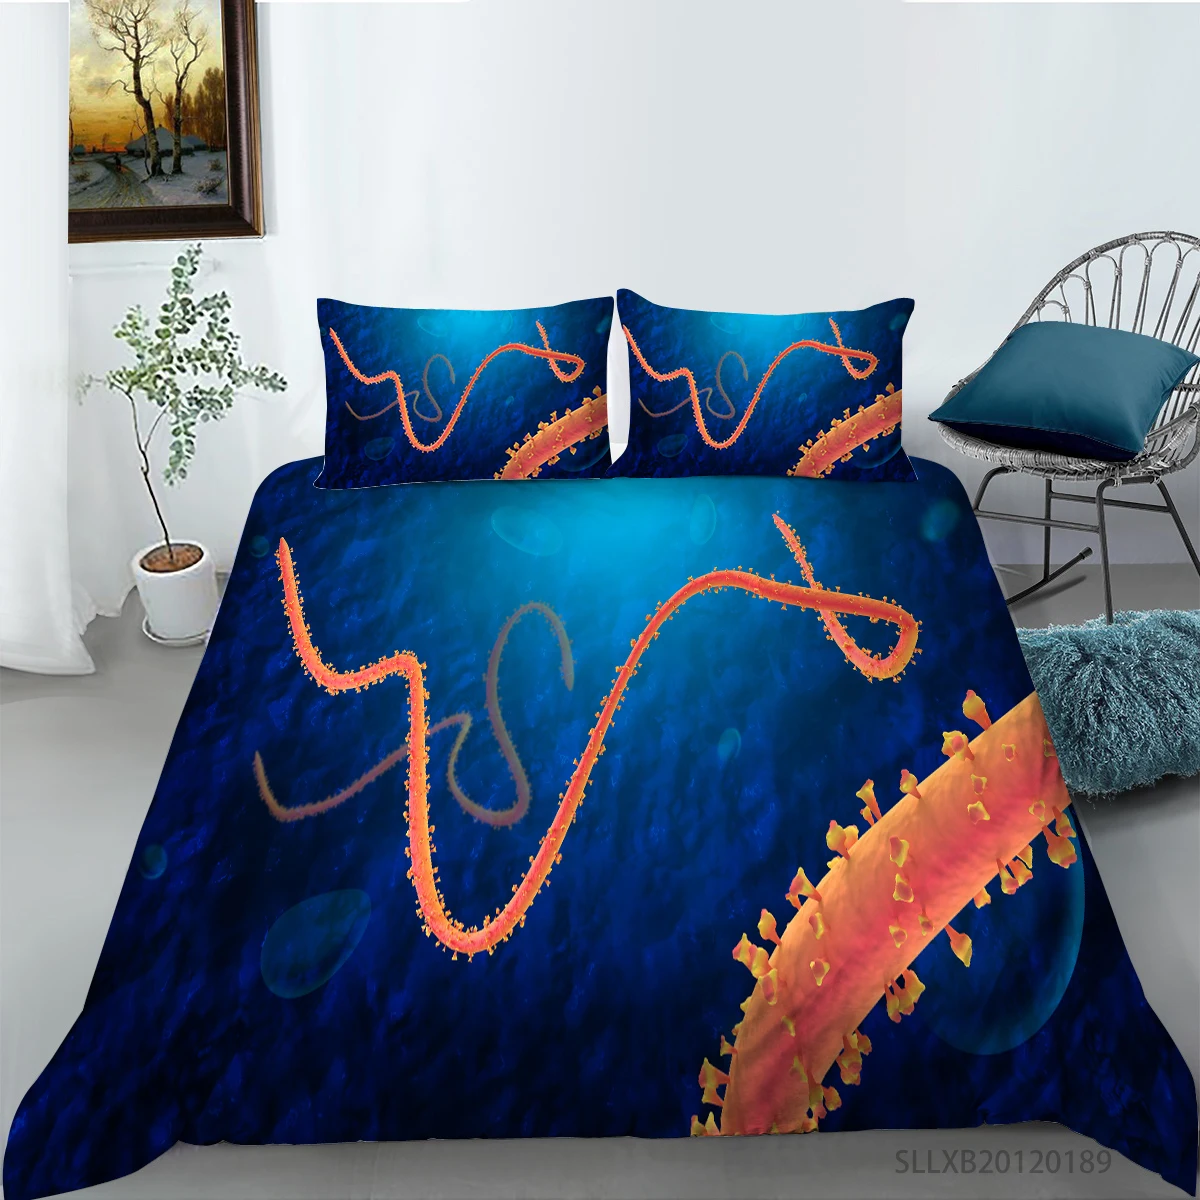 

3D Nerve Printing Bedding set Bedclothes Quilt cover with pillowcases 100% Microfiber Home Textiles 2/3 pieces